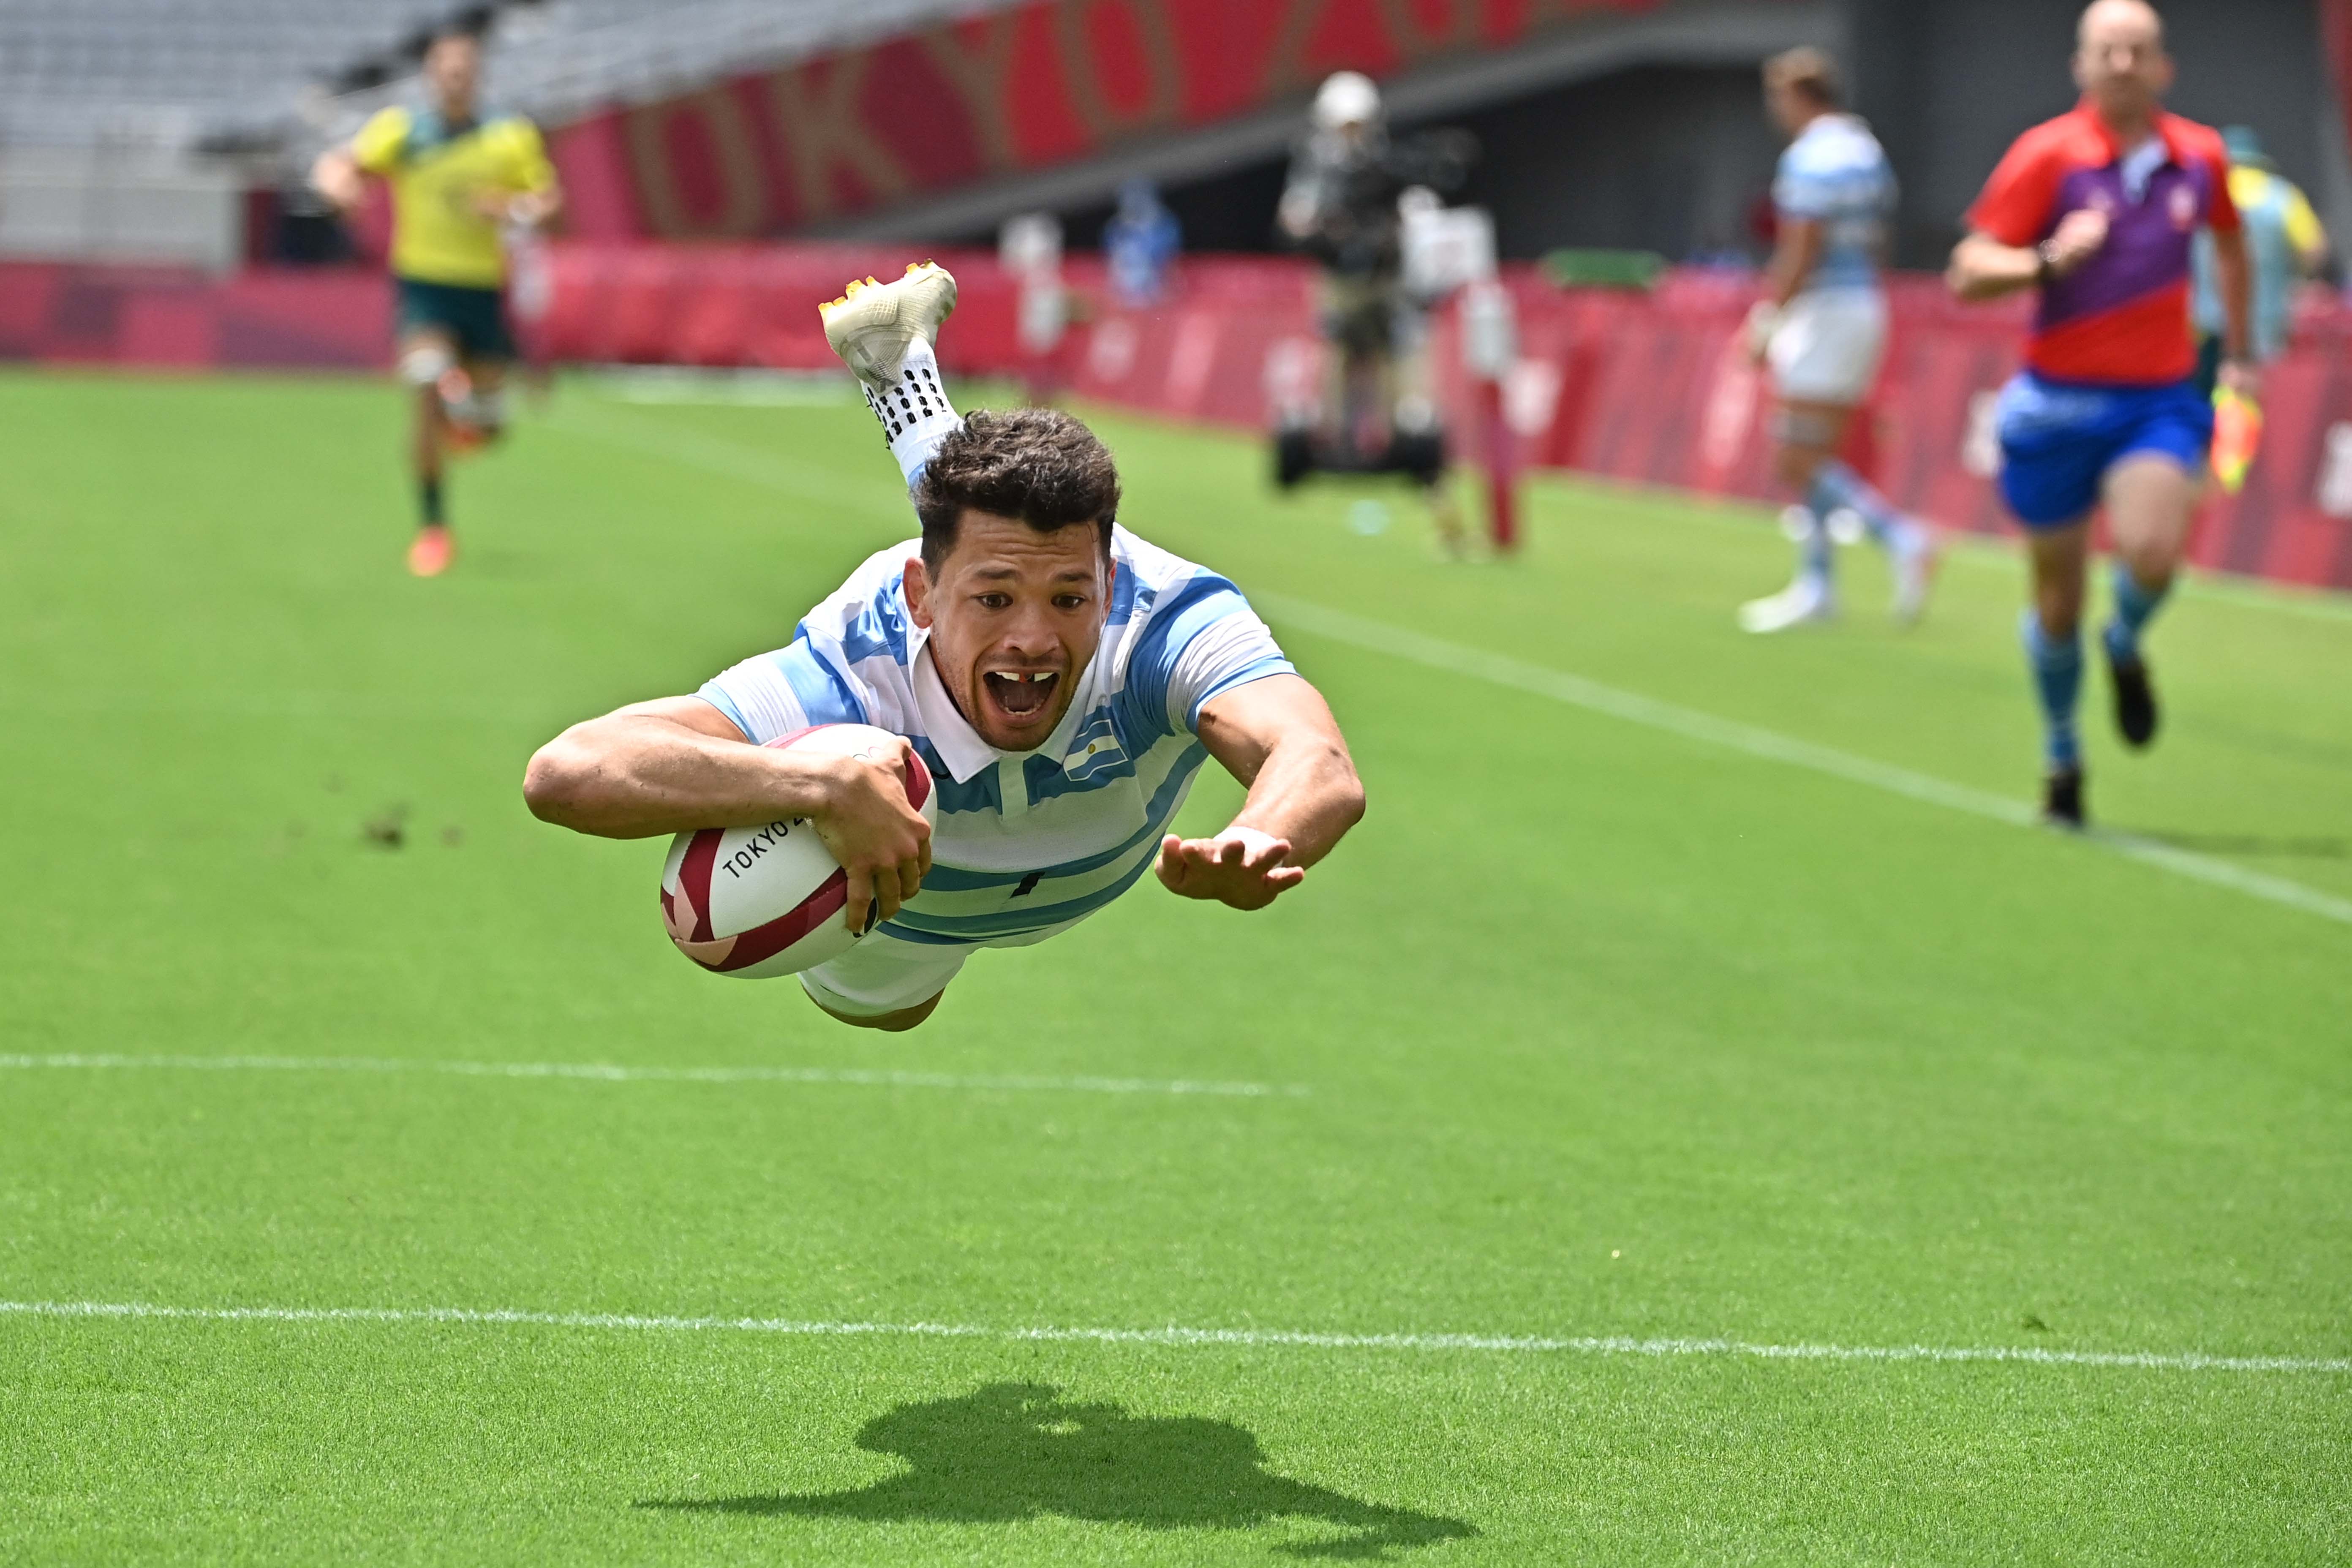 Argentina's Lautaro Bazan Velez scores a try in the men's pool A rugby sevens match between Australia and Argentina during the Tokyo 2020 Olympic Games at the Tokyo Stadium in Tokyo on July 26, 2021. (Photo by Ben STANSALL / AFP)